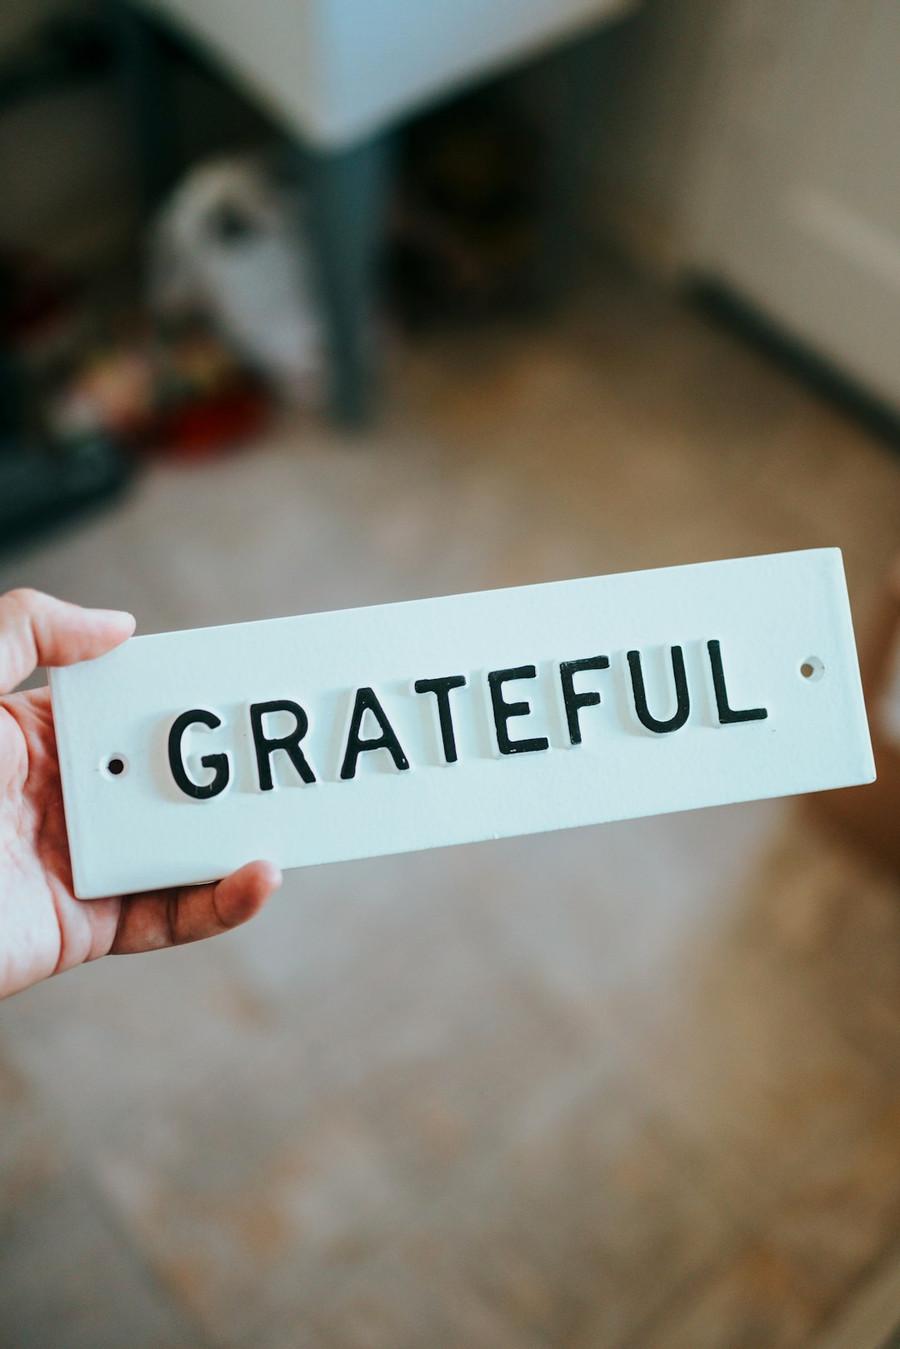 5. Pry or being grateful.